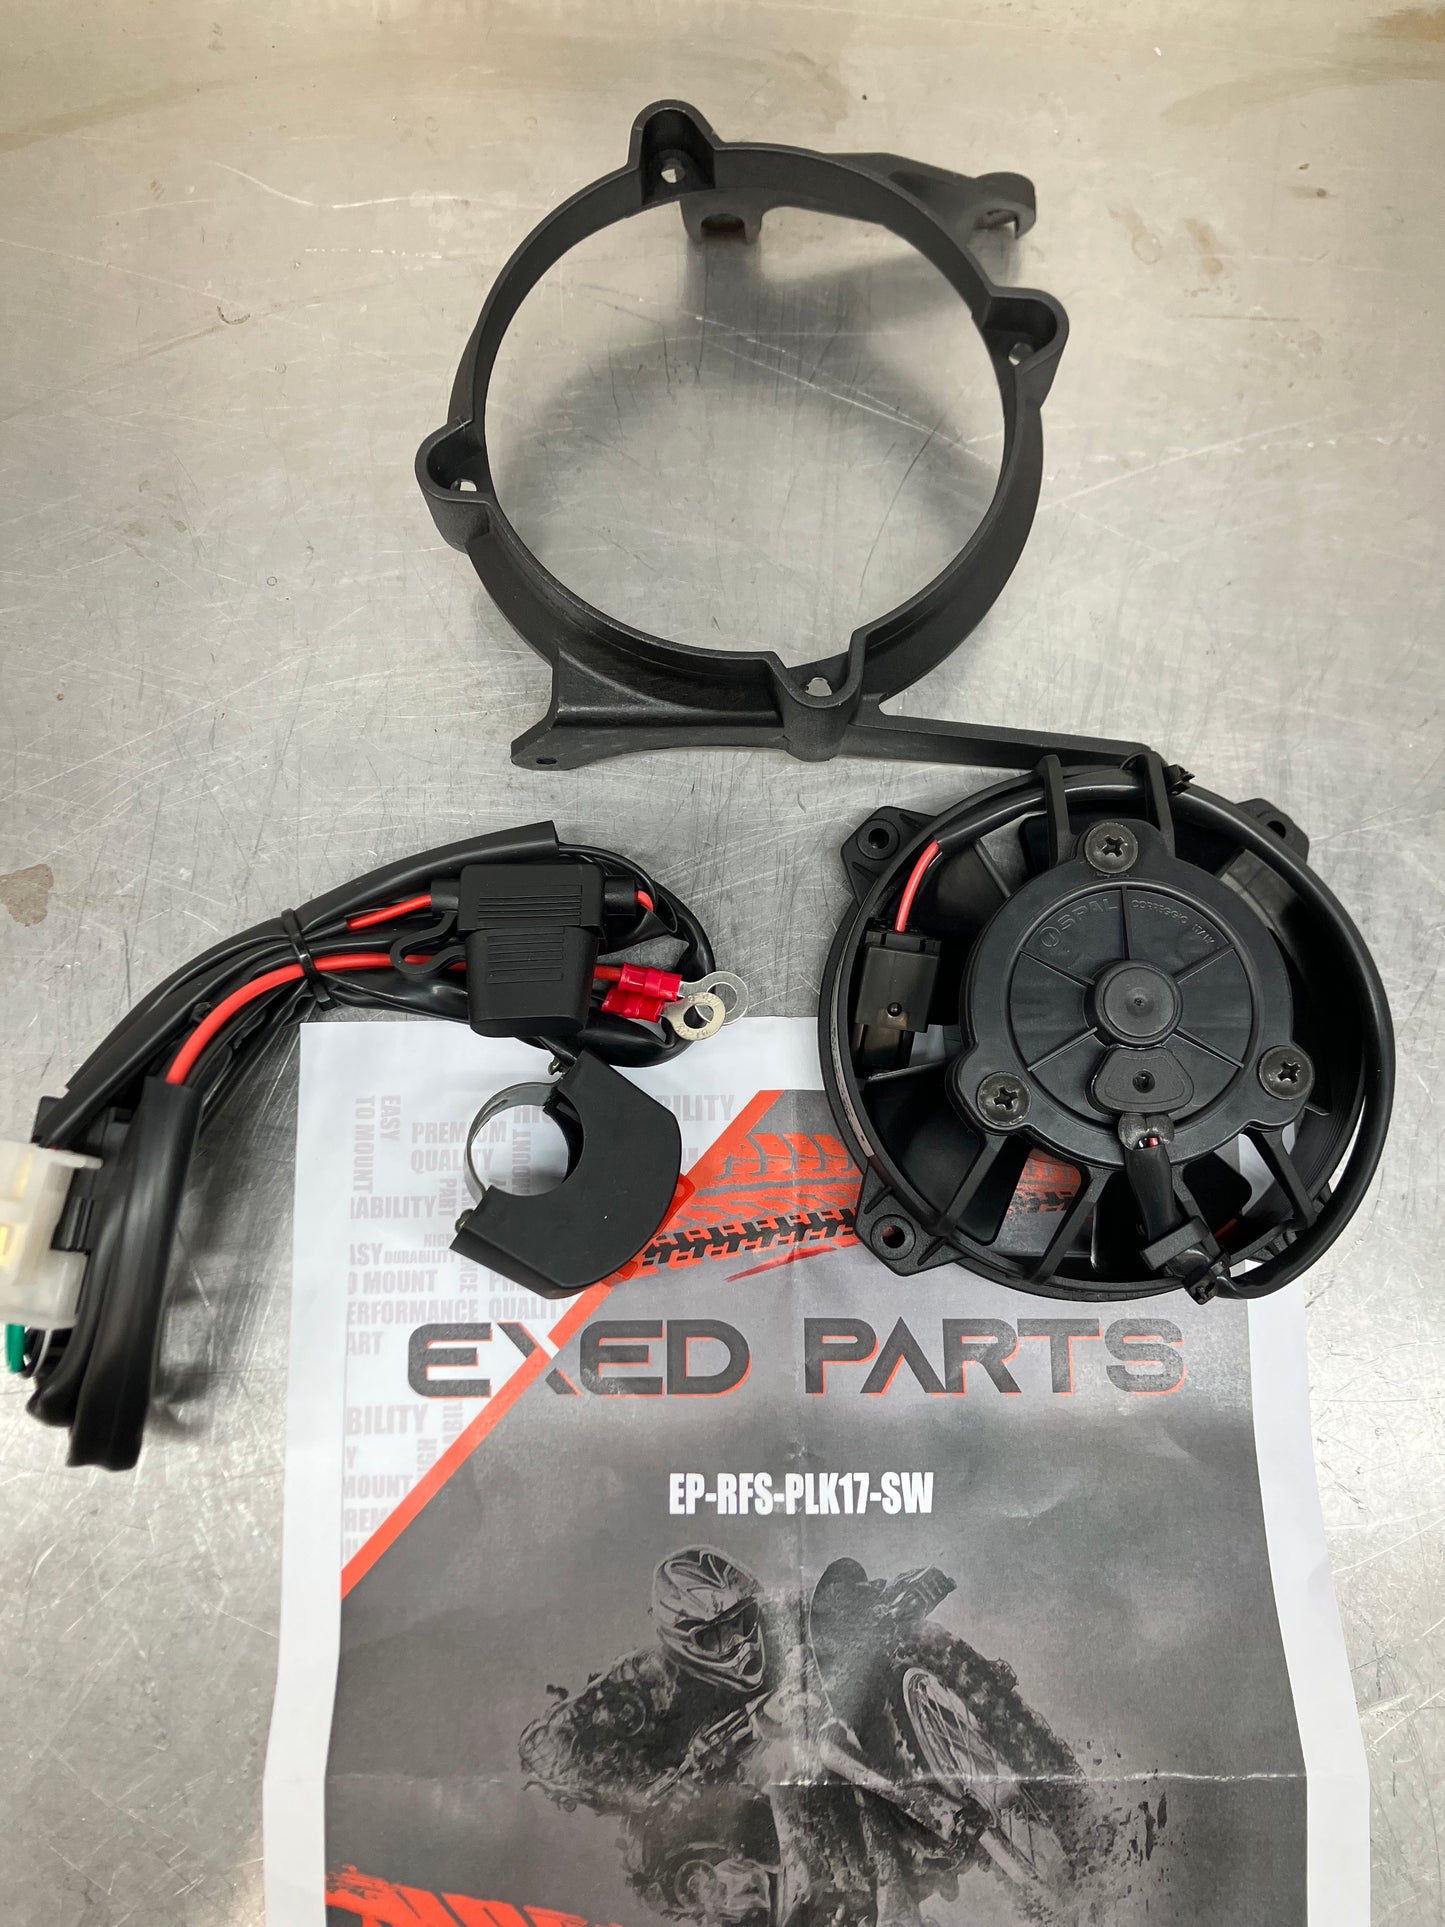 EXTREME PARTS  Original SPAL Radiator Cooling Fan and Mounting Kit for KTM and HUSQVARNA, with ON/OFF switch, Dirt Bike Models from 2017 to 2023